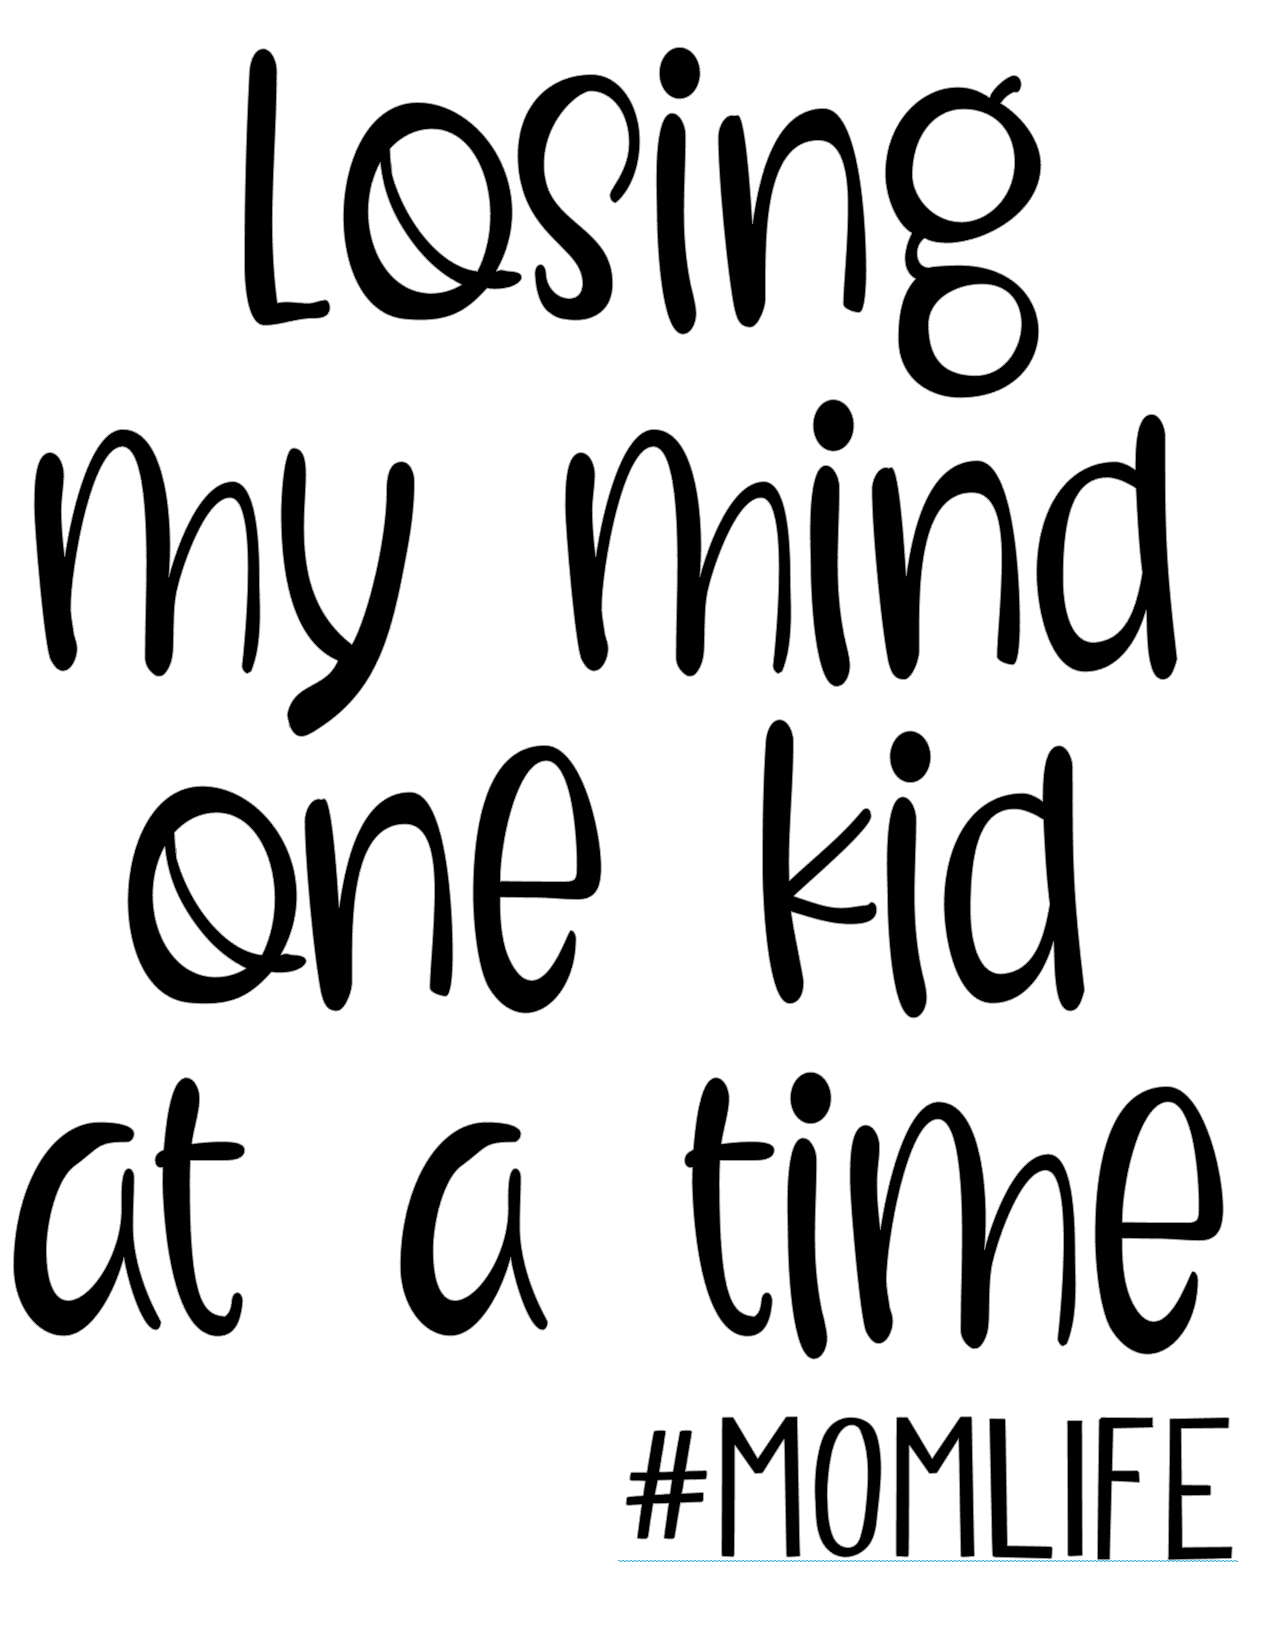 #311 Losing my mind one kid at a time #MOMLIFE